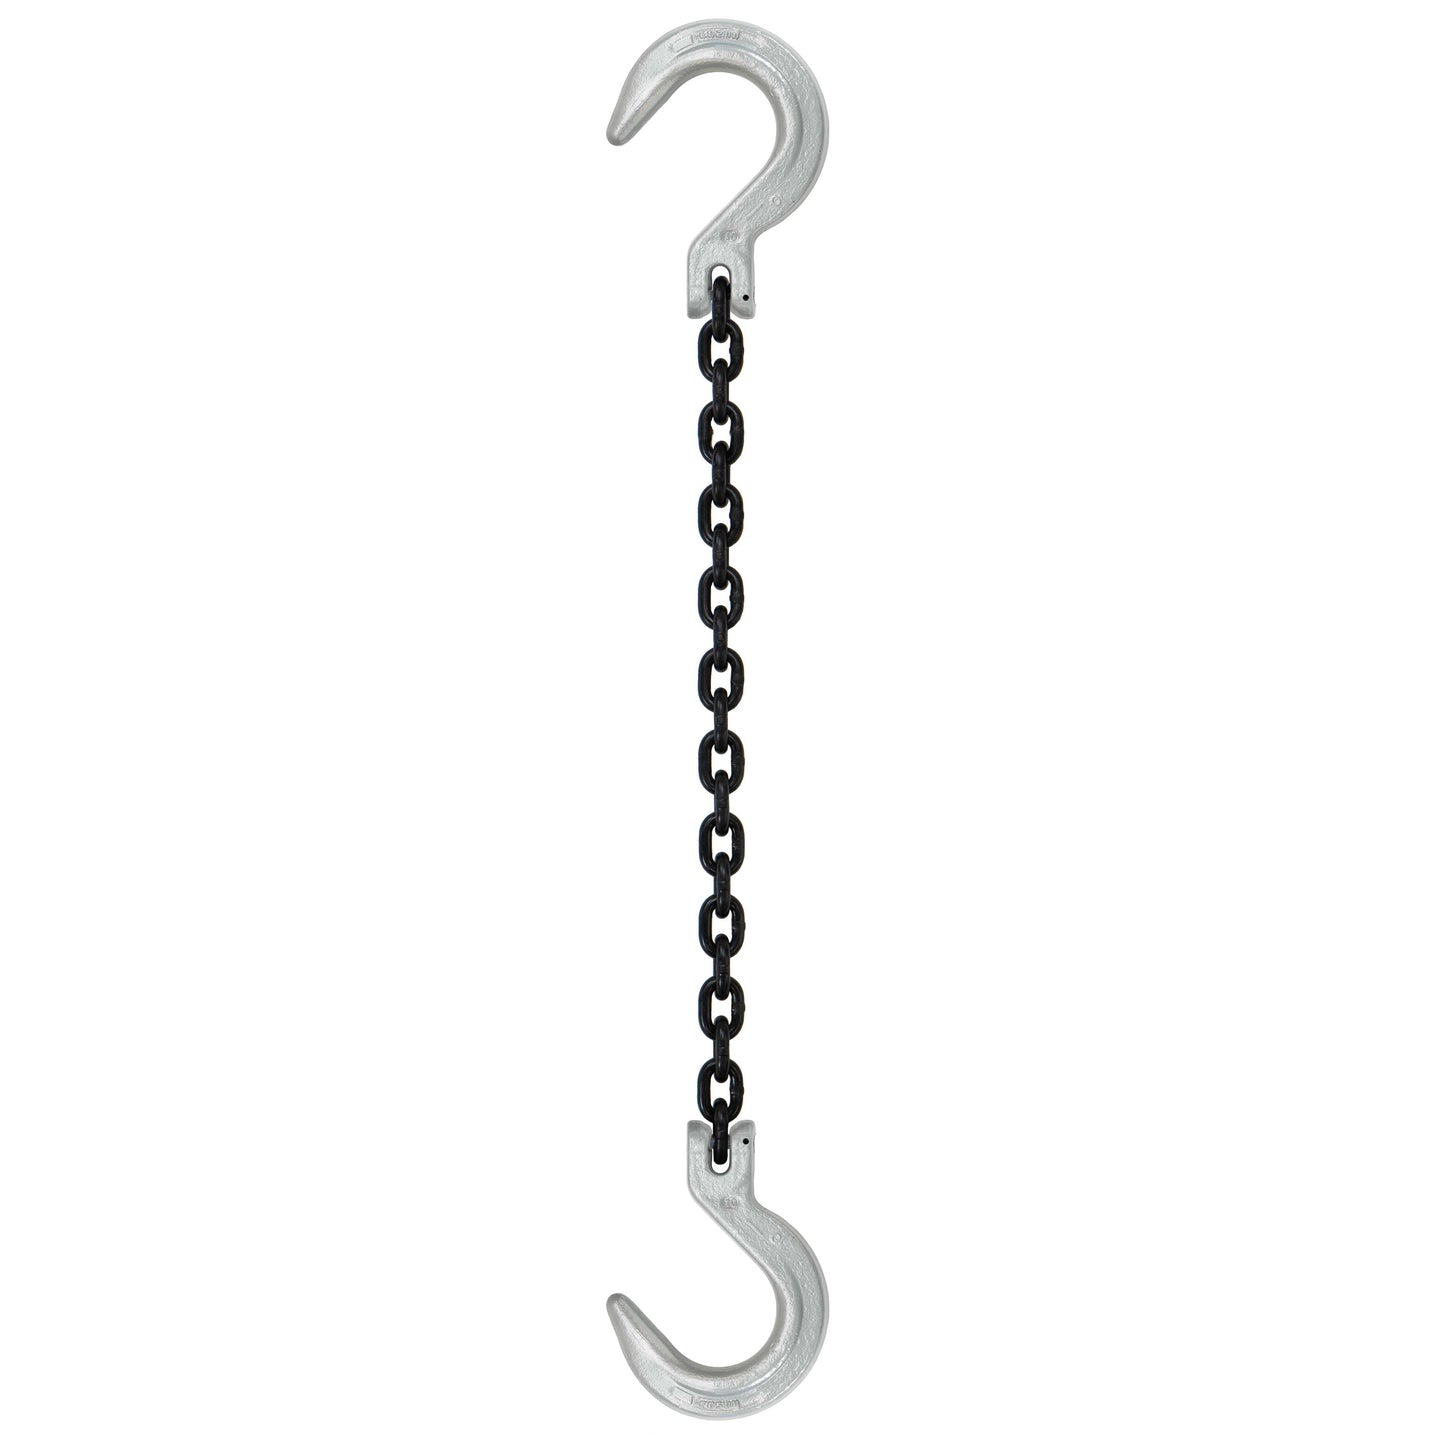 932 inch x 4 foot Domestic Single Leg Chain Sling w Crosby Foundry & Foundry Hooks Grade 100 image 1 of 2